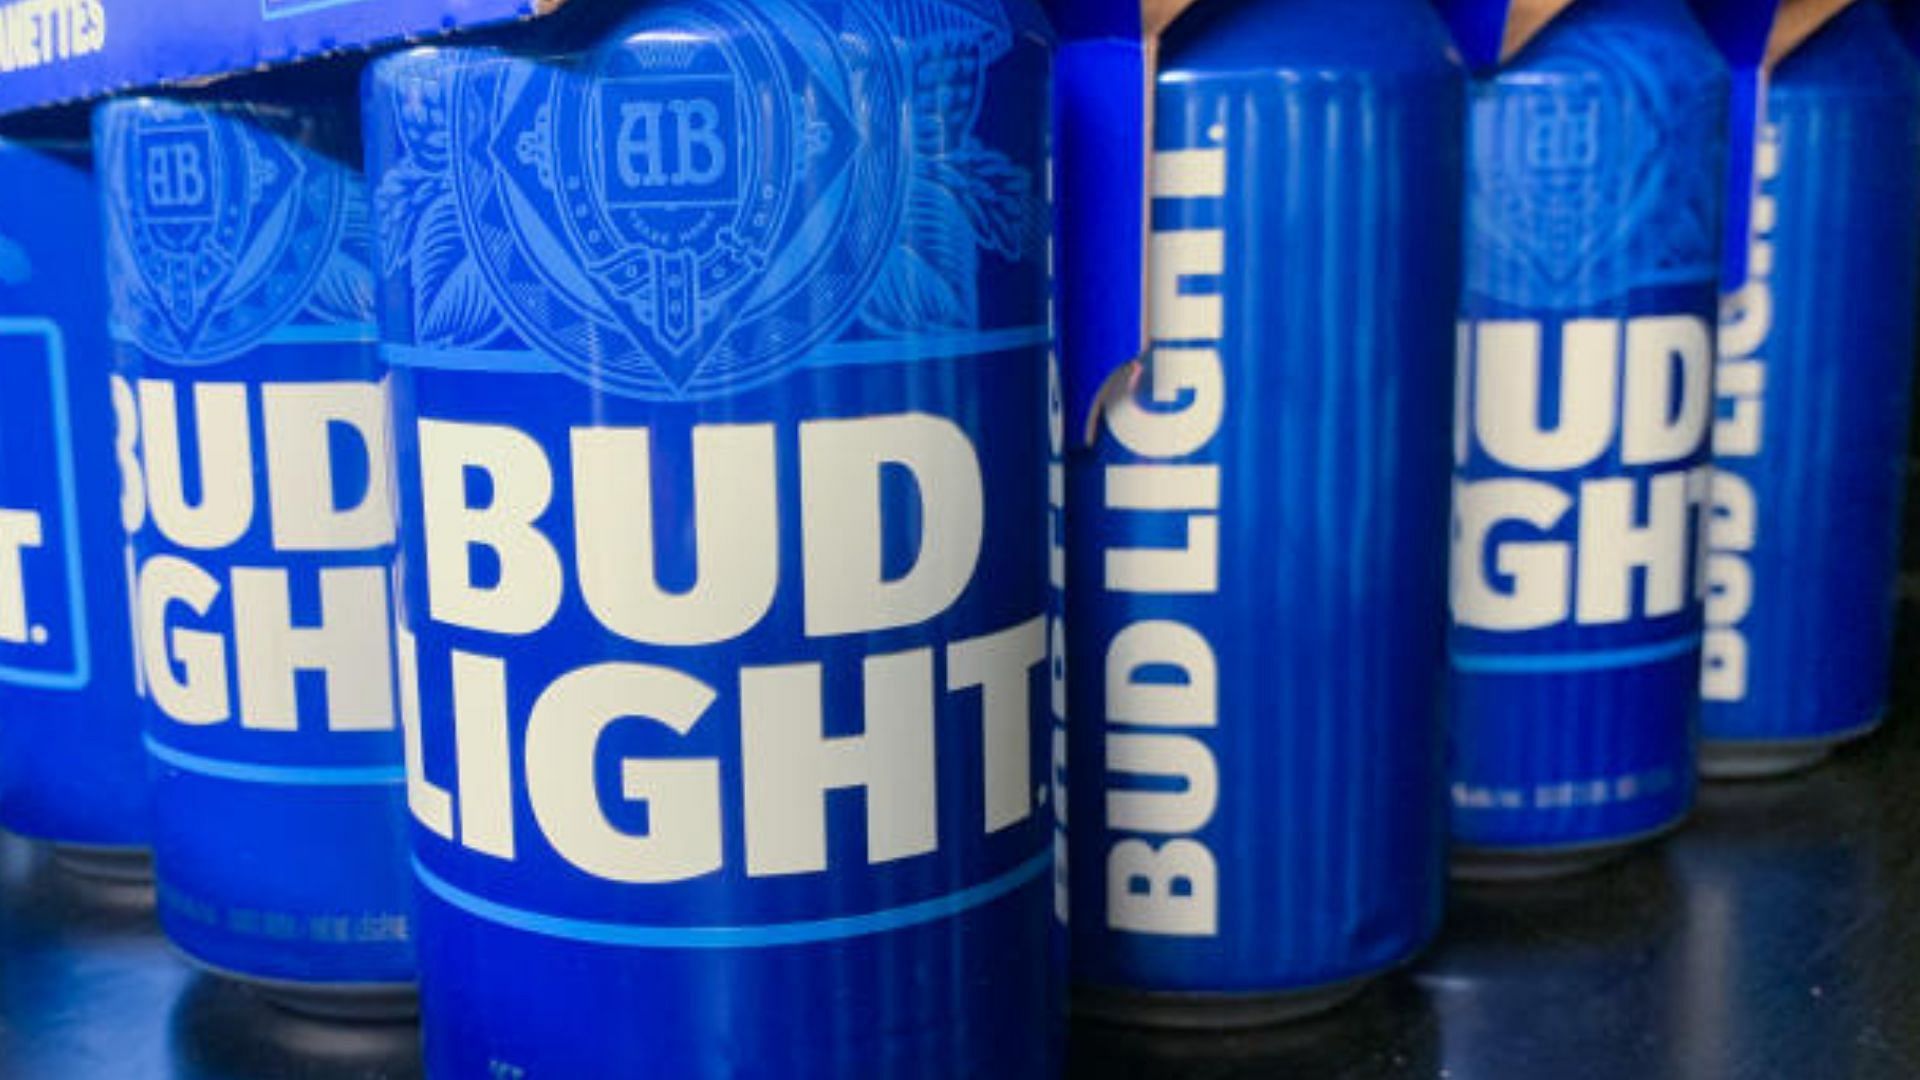 Bud Light Beer rebate form 2023 How to claim, validity, and all you